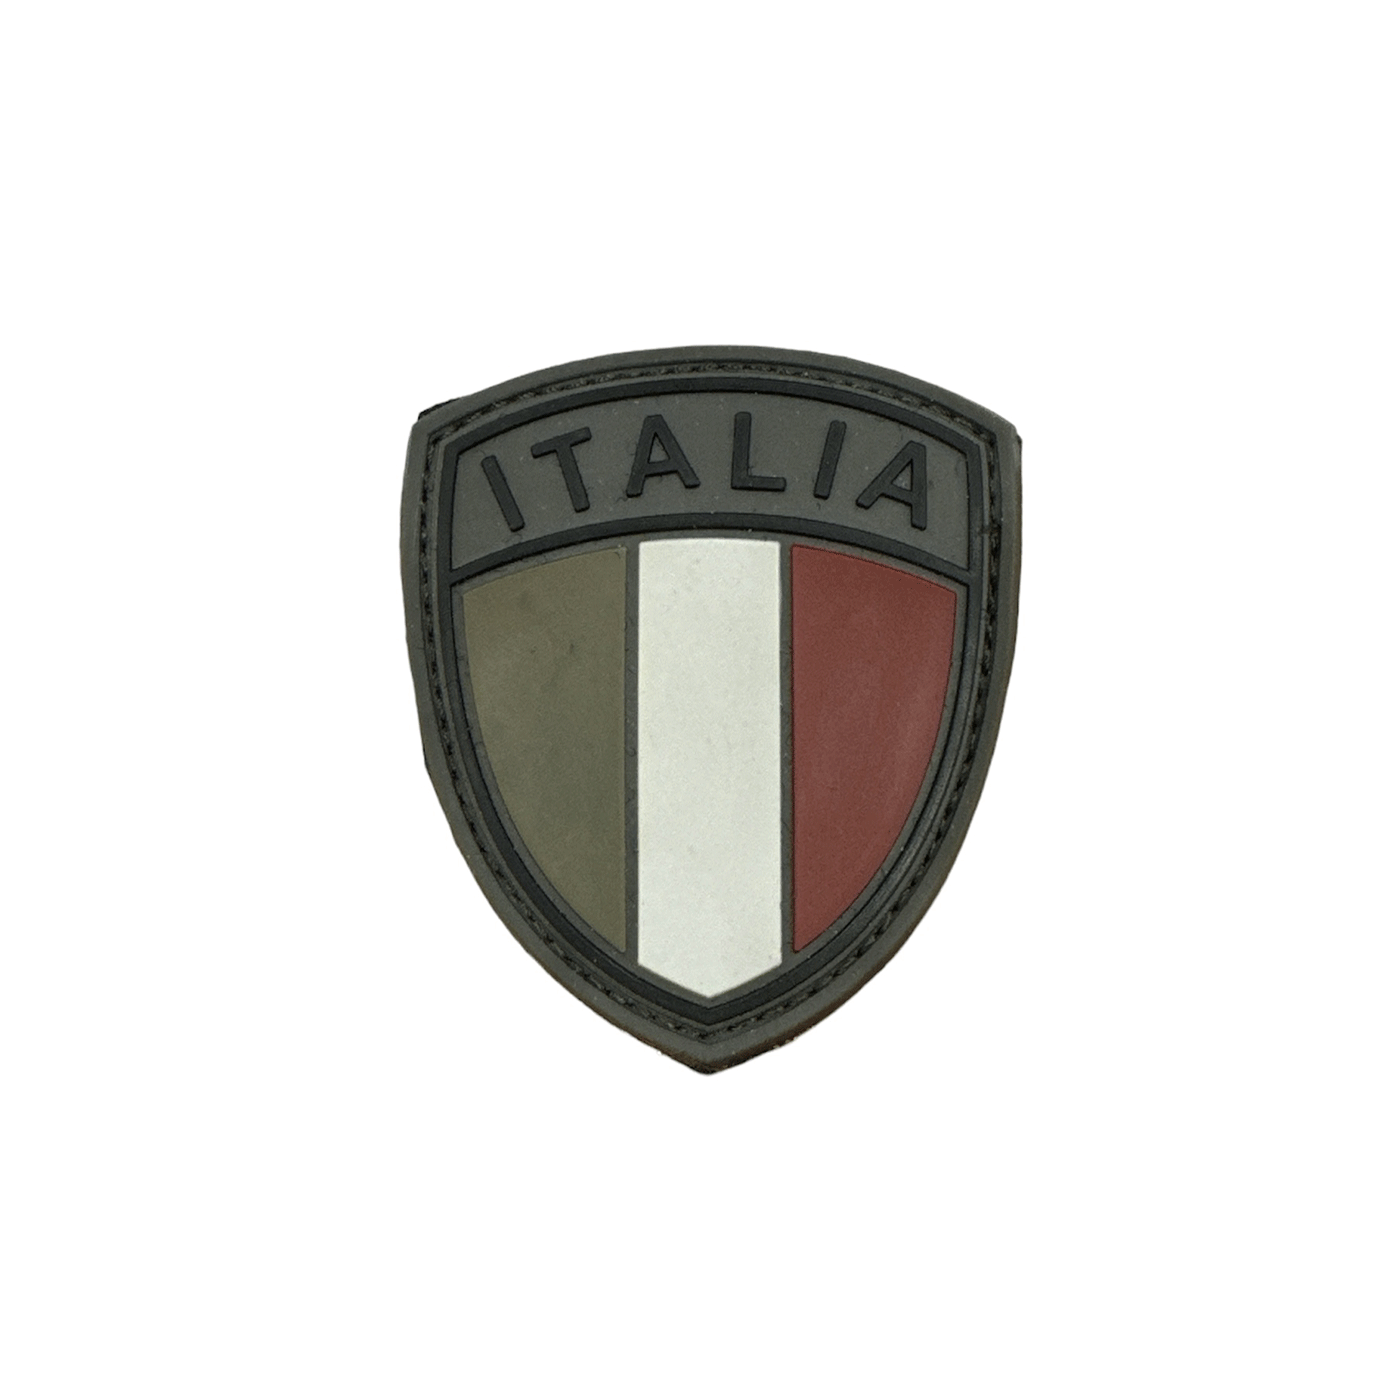 PATCH - ITALY LOW VISIBILITY SHIELD (WITH VELCRO)